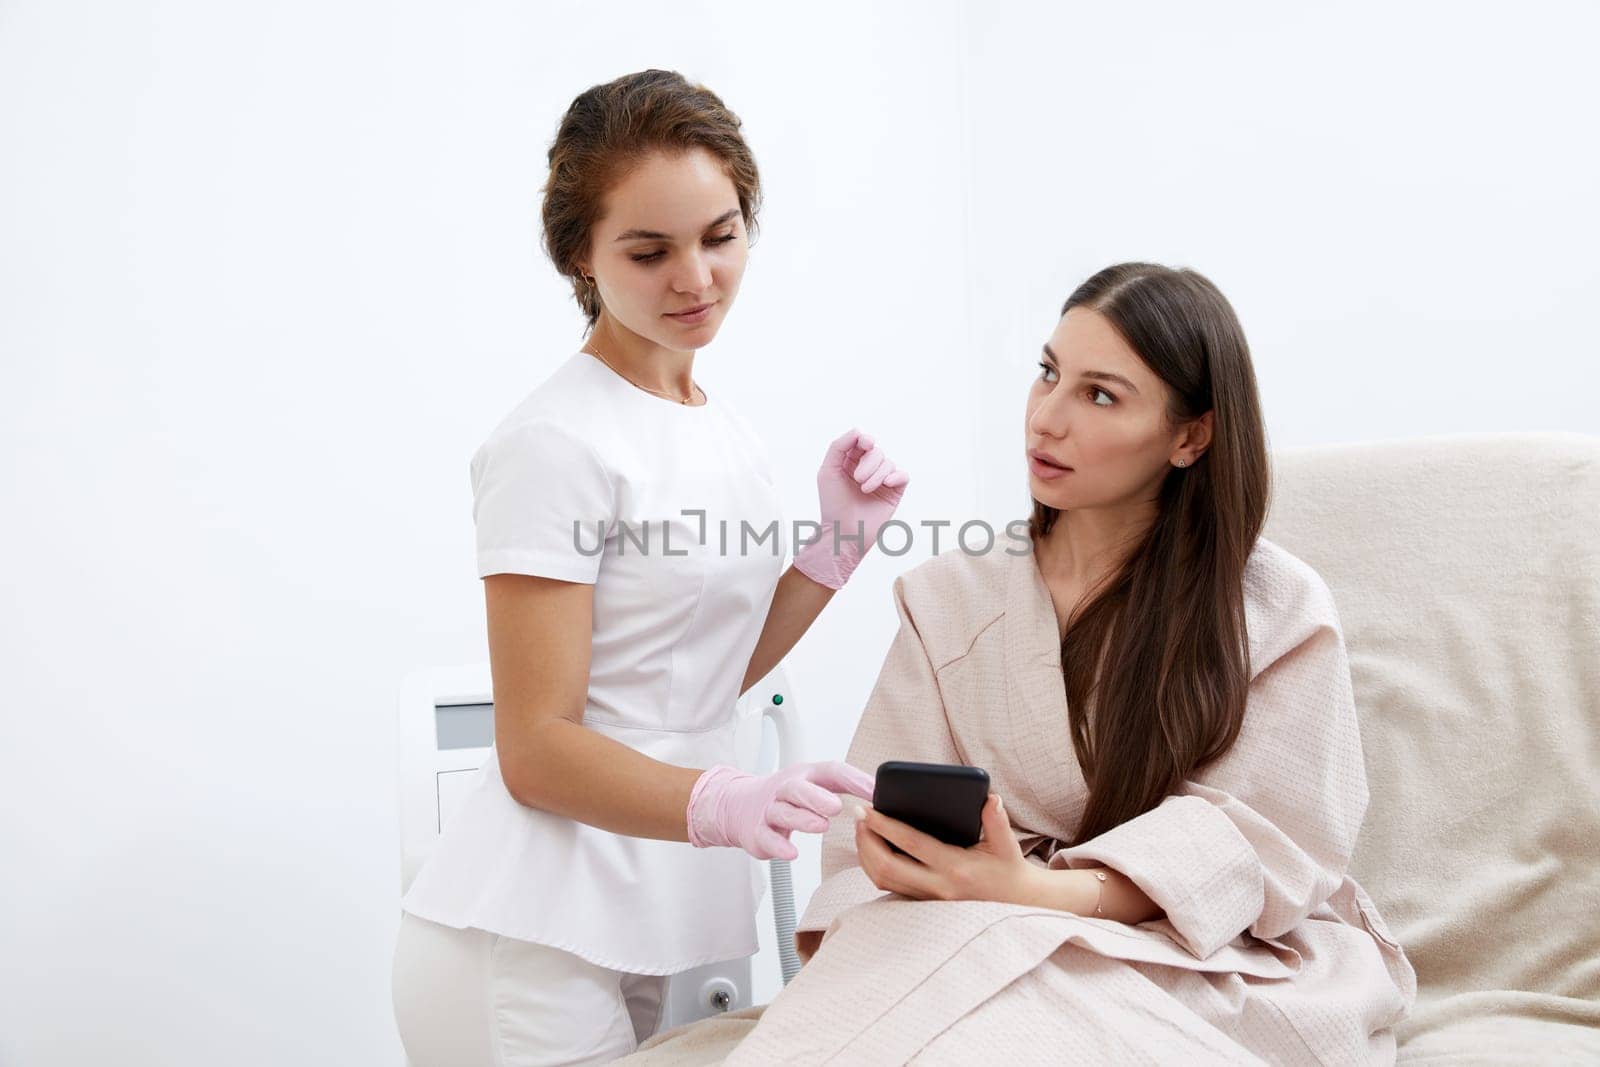 Young female cosmetologist and patient engage in beauty procedure discussion by Mariakray